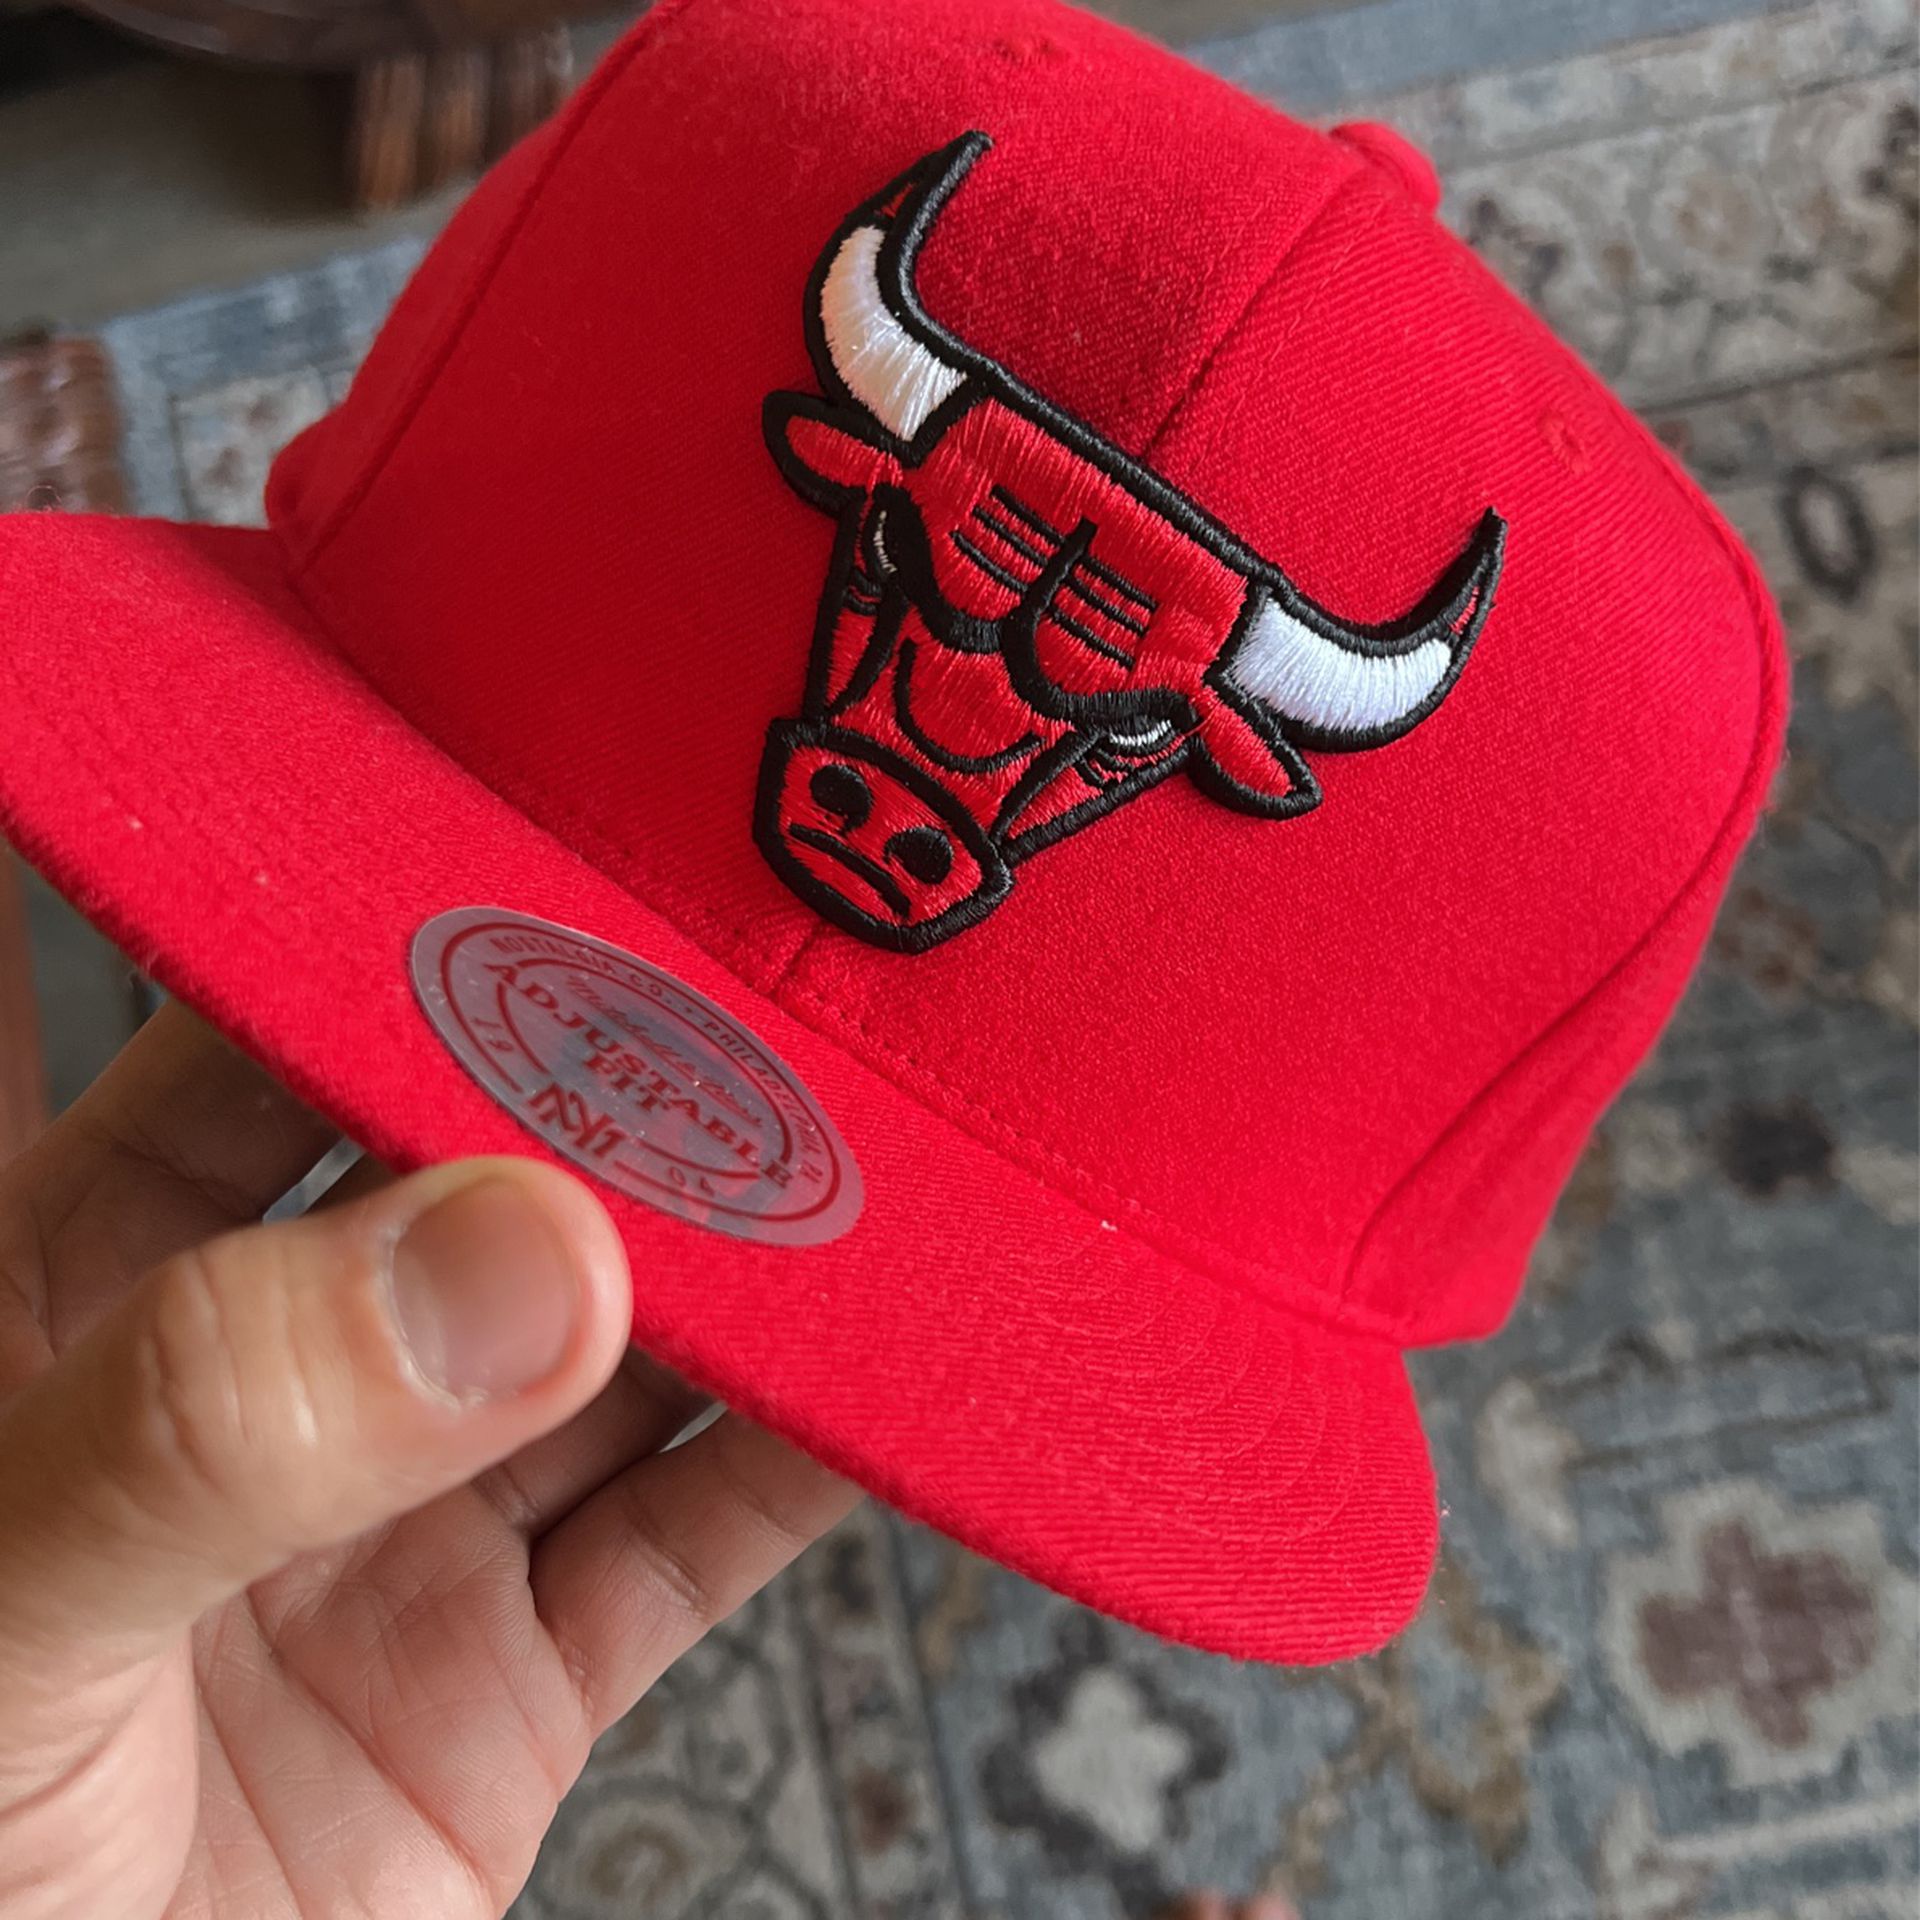 MITCHELL & NESS for Sale in Los Angeles, CA - OfferUp